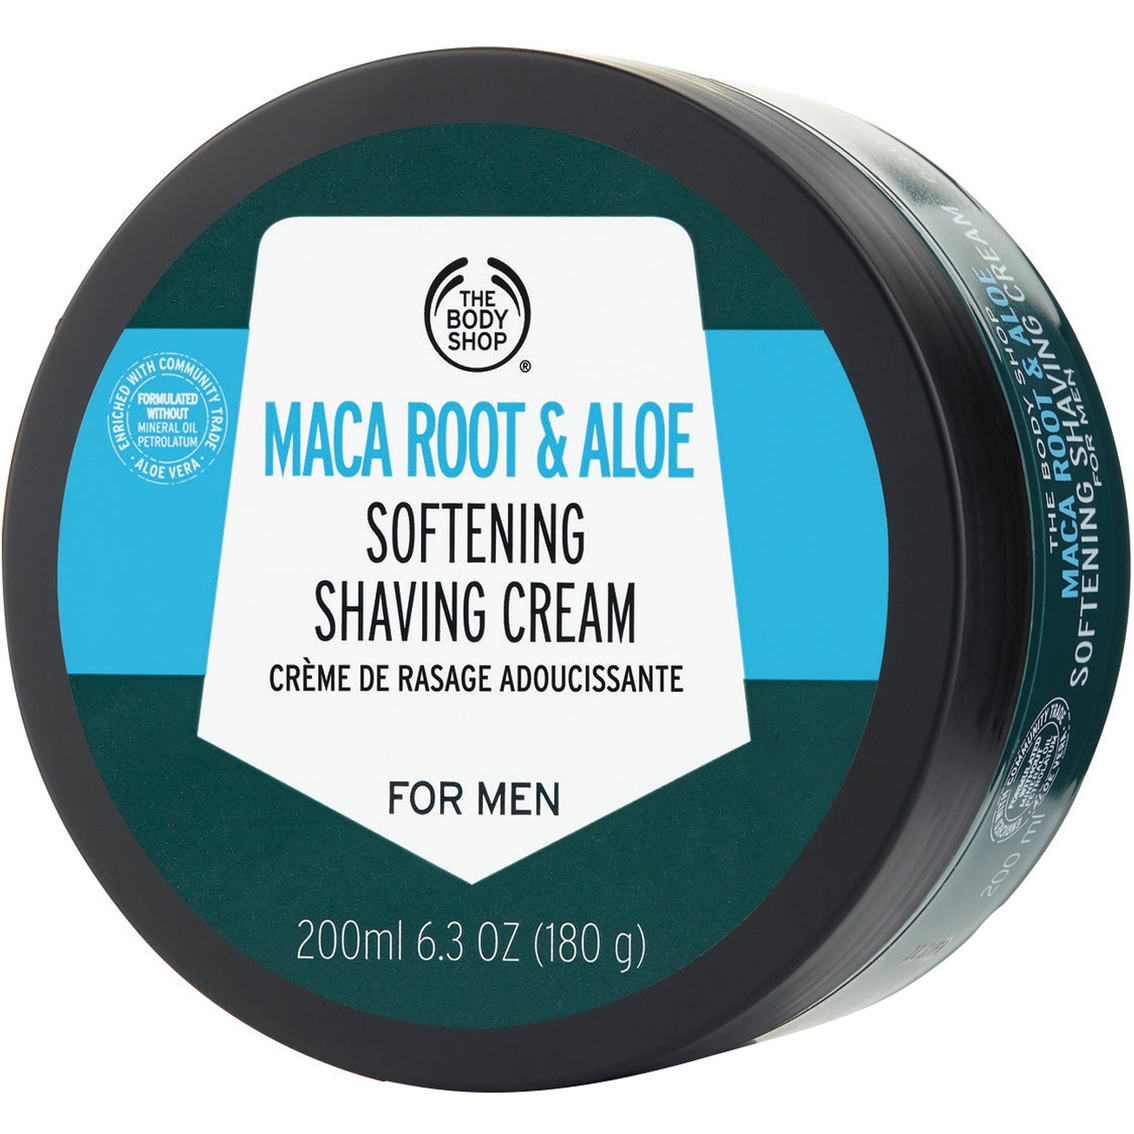 The Body Shop Maca Root and Aloe Softening Shaving Cream for Men 6.3 oz. - Image 3 of 3